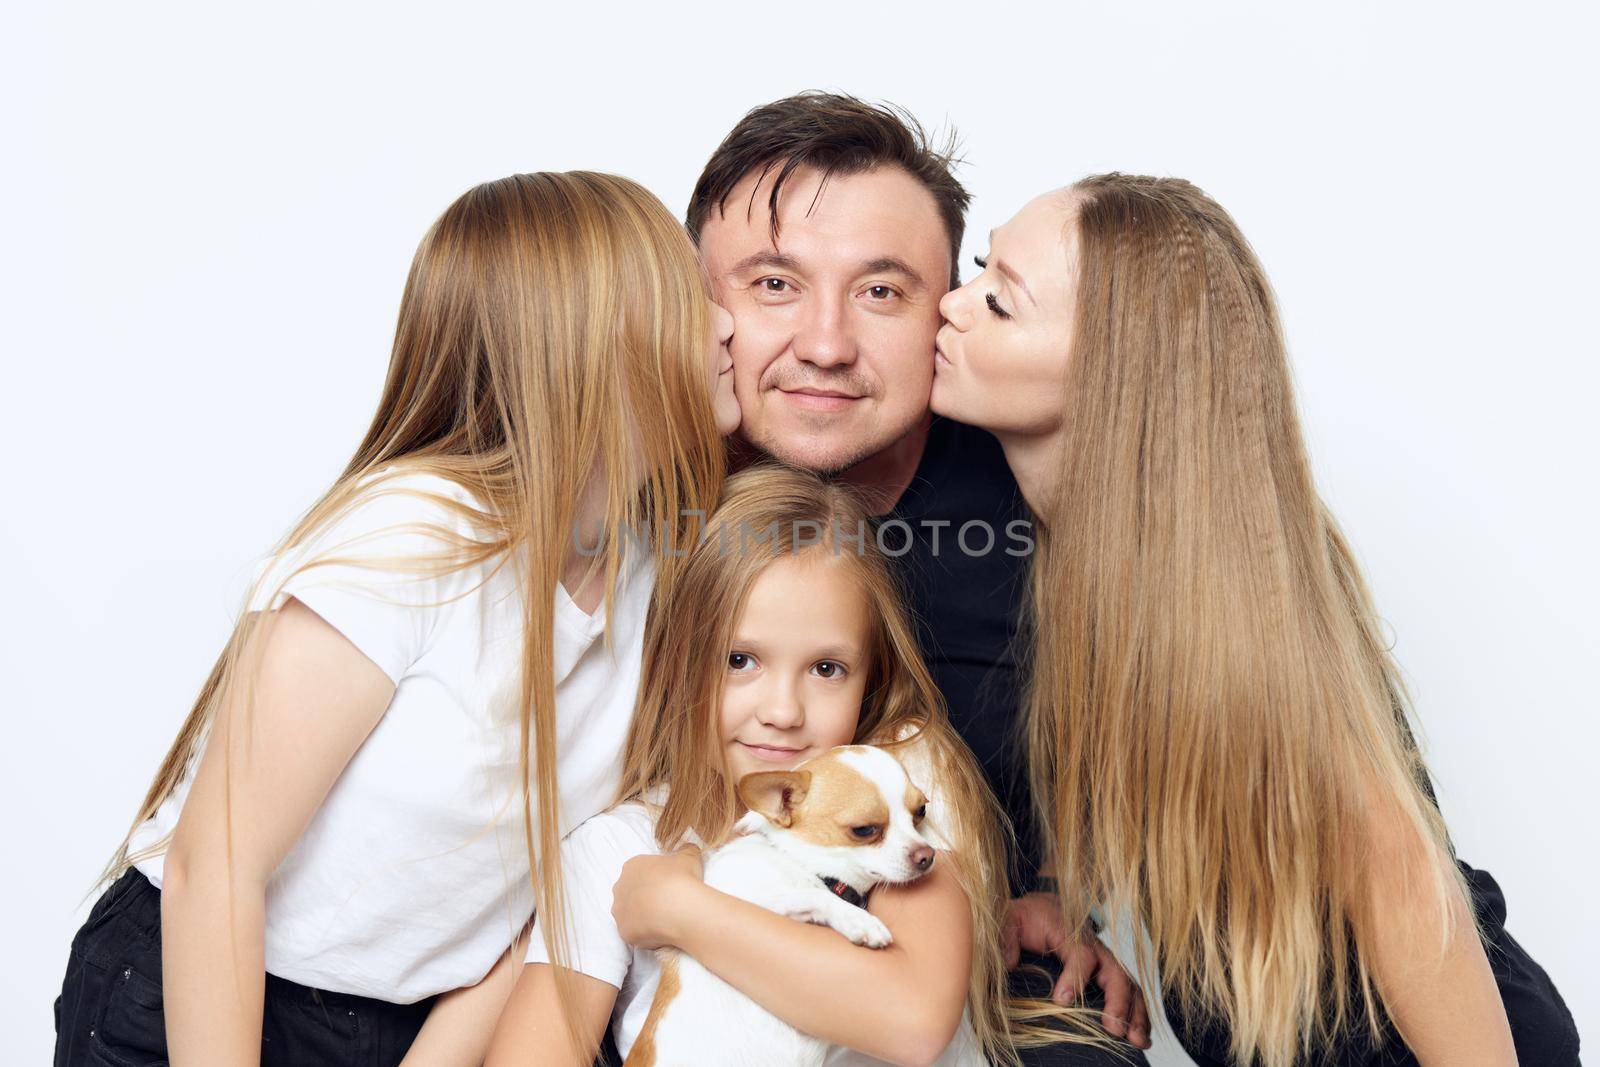 mom with daughter kissing father girl with dog in her arms family photo close-up by SHOTPRIME